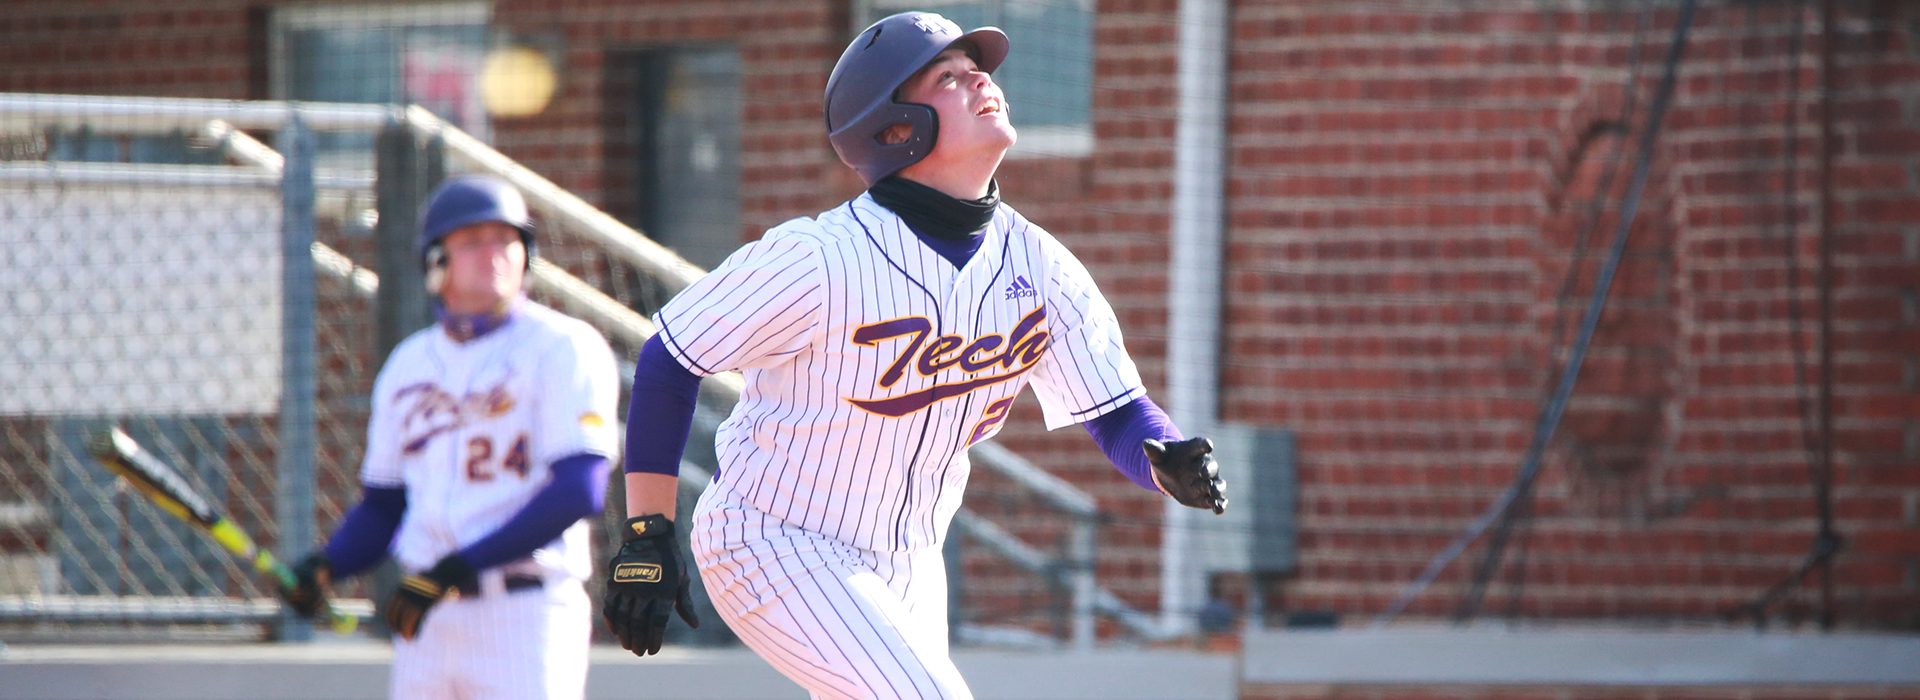 Tech bats salvage doubleheader split at UT Martin, total 20 hits in game two